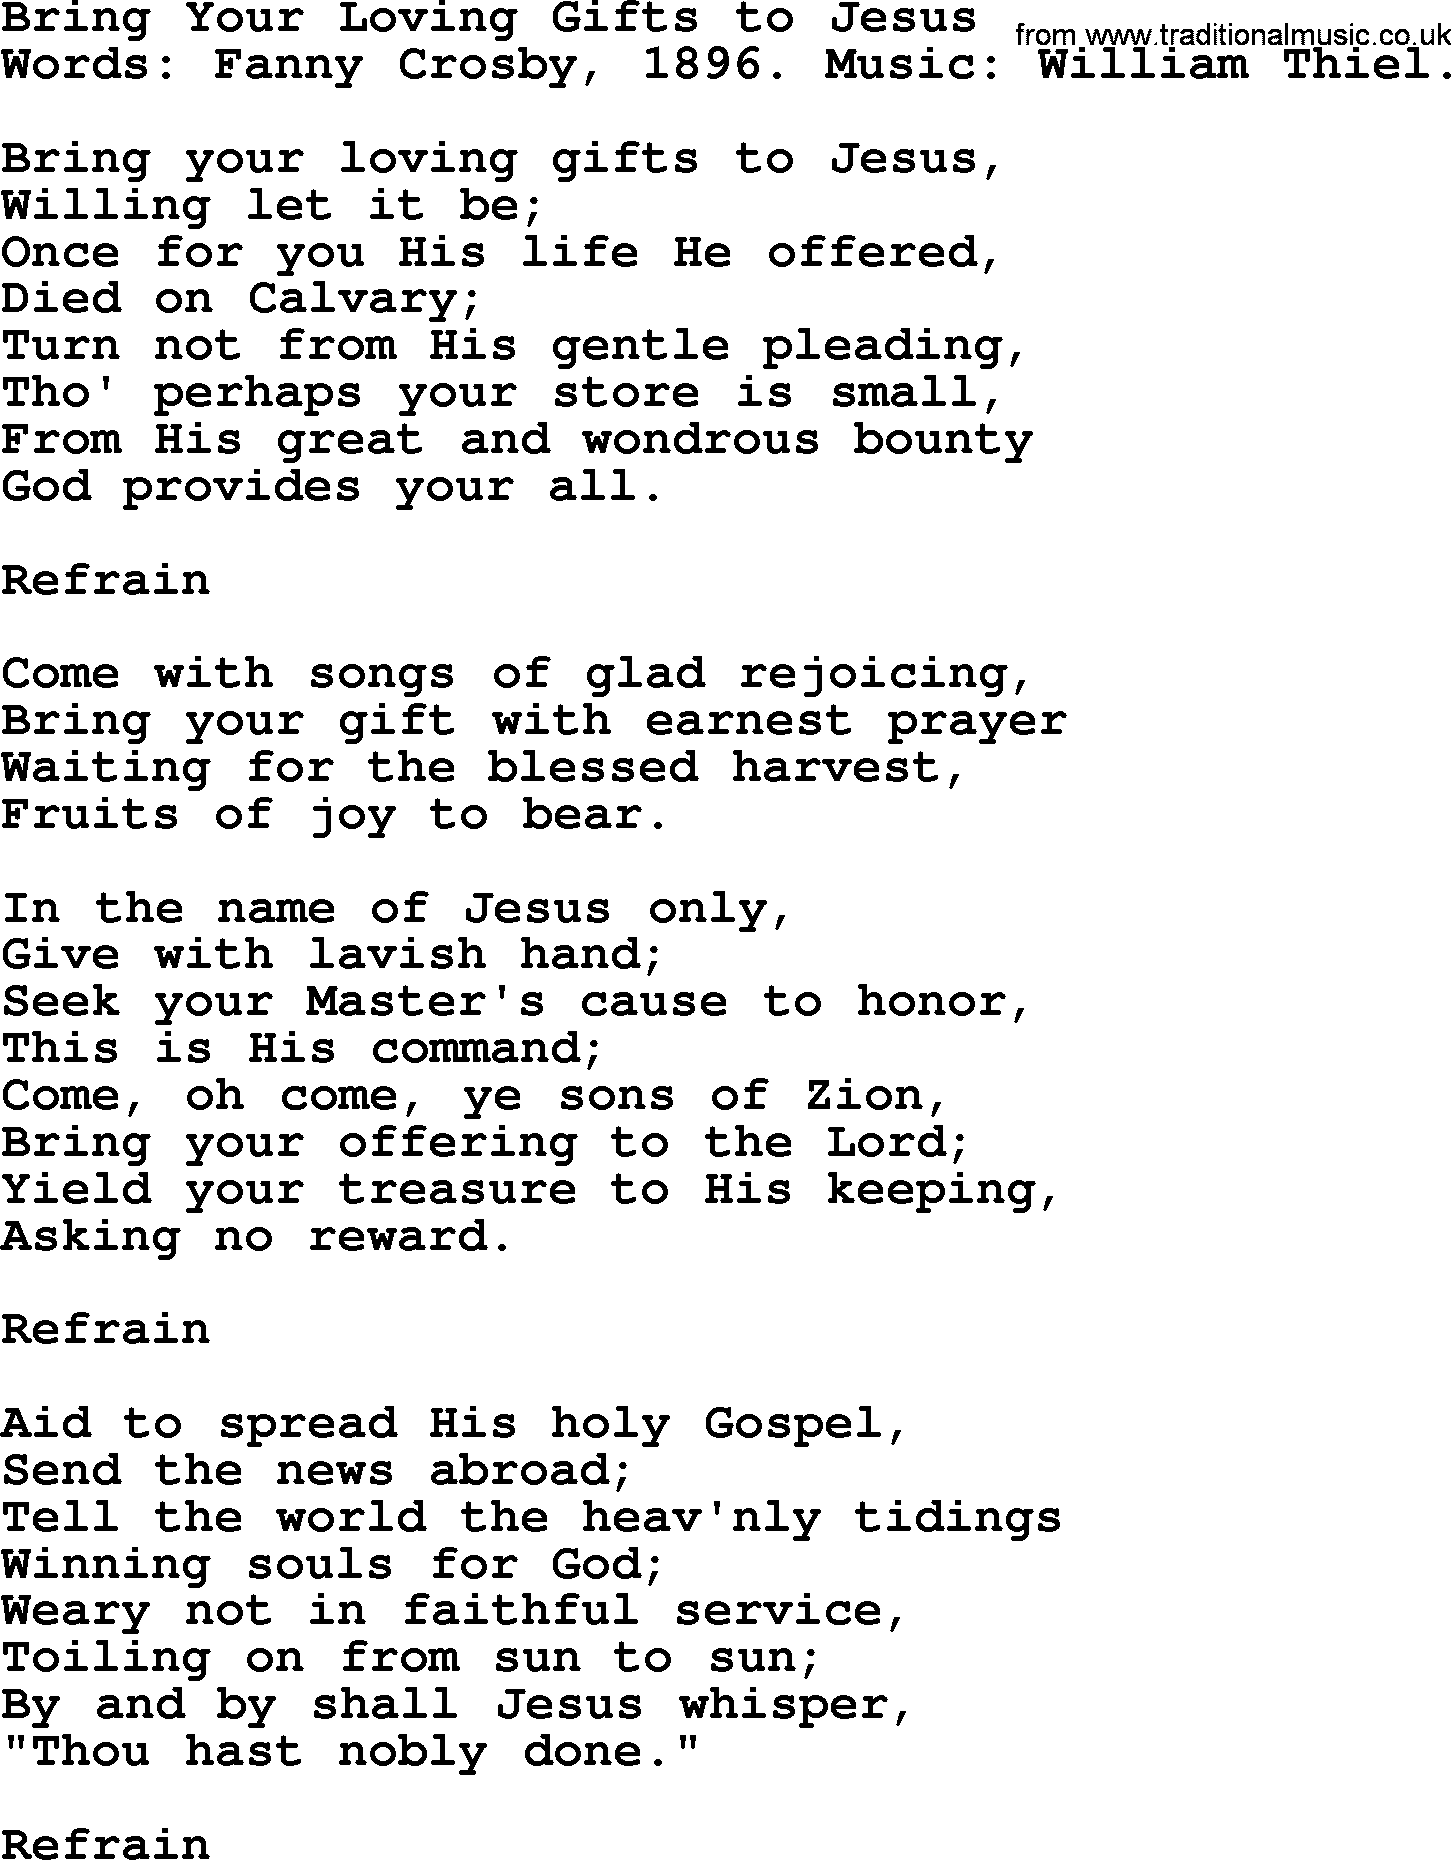 Fanny Crosby song: Bring Your Loving Gifts To Jesus, lyrics